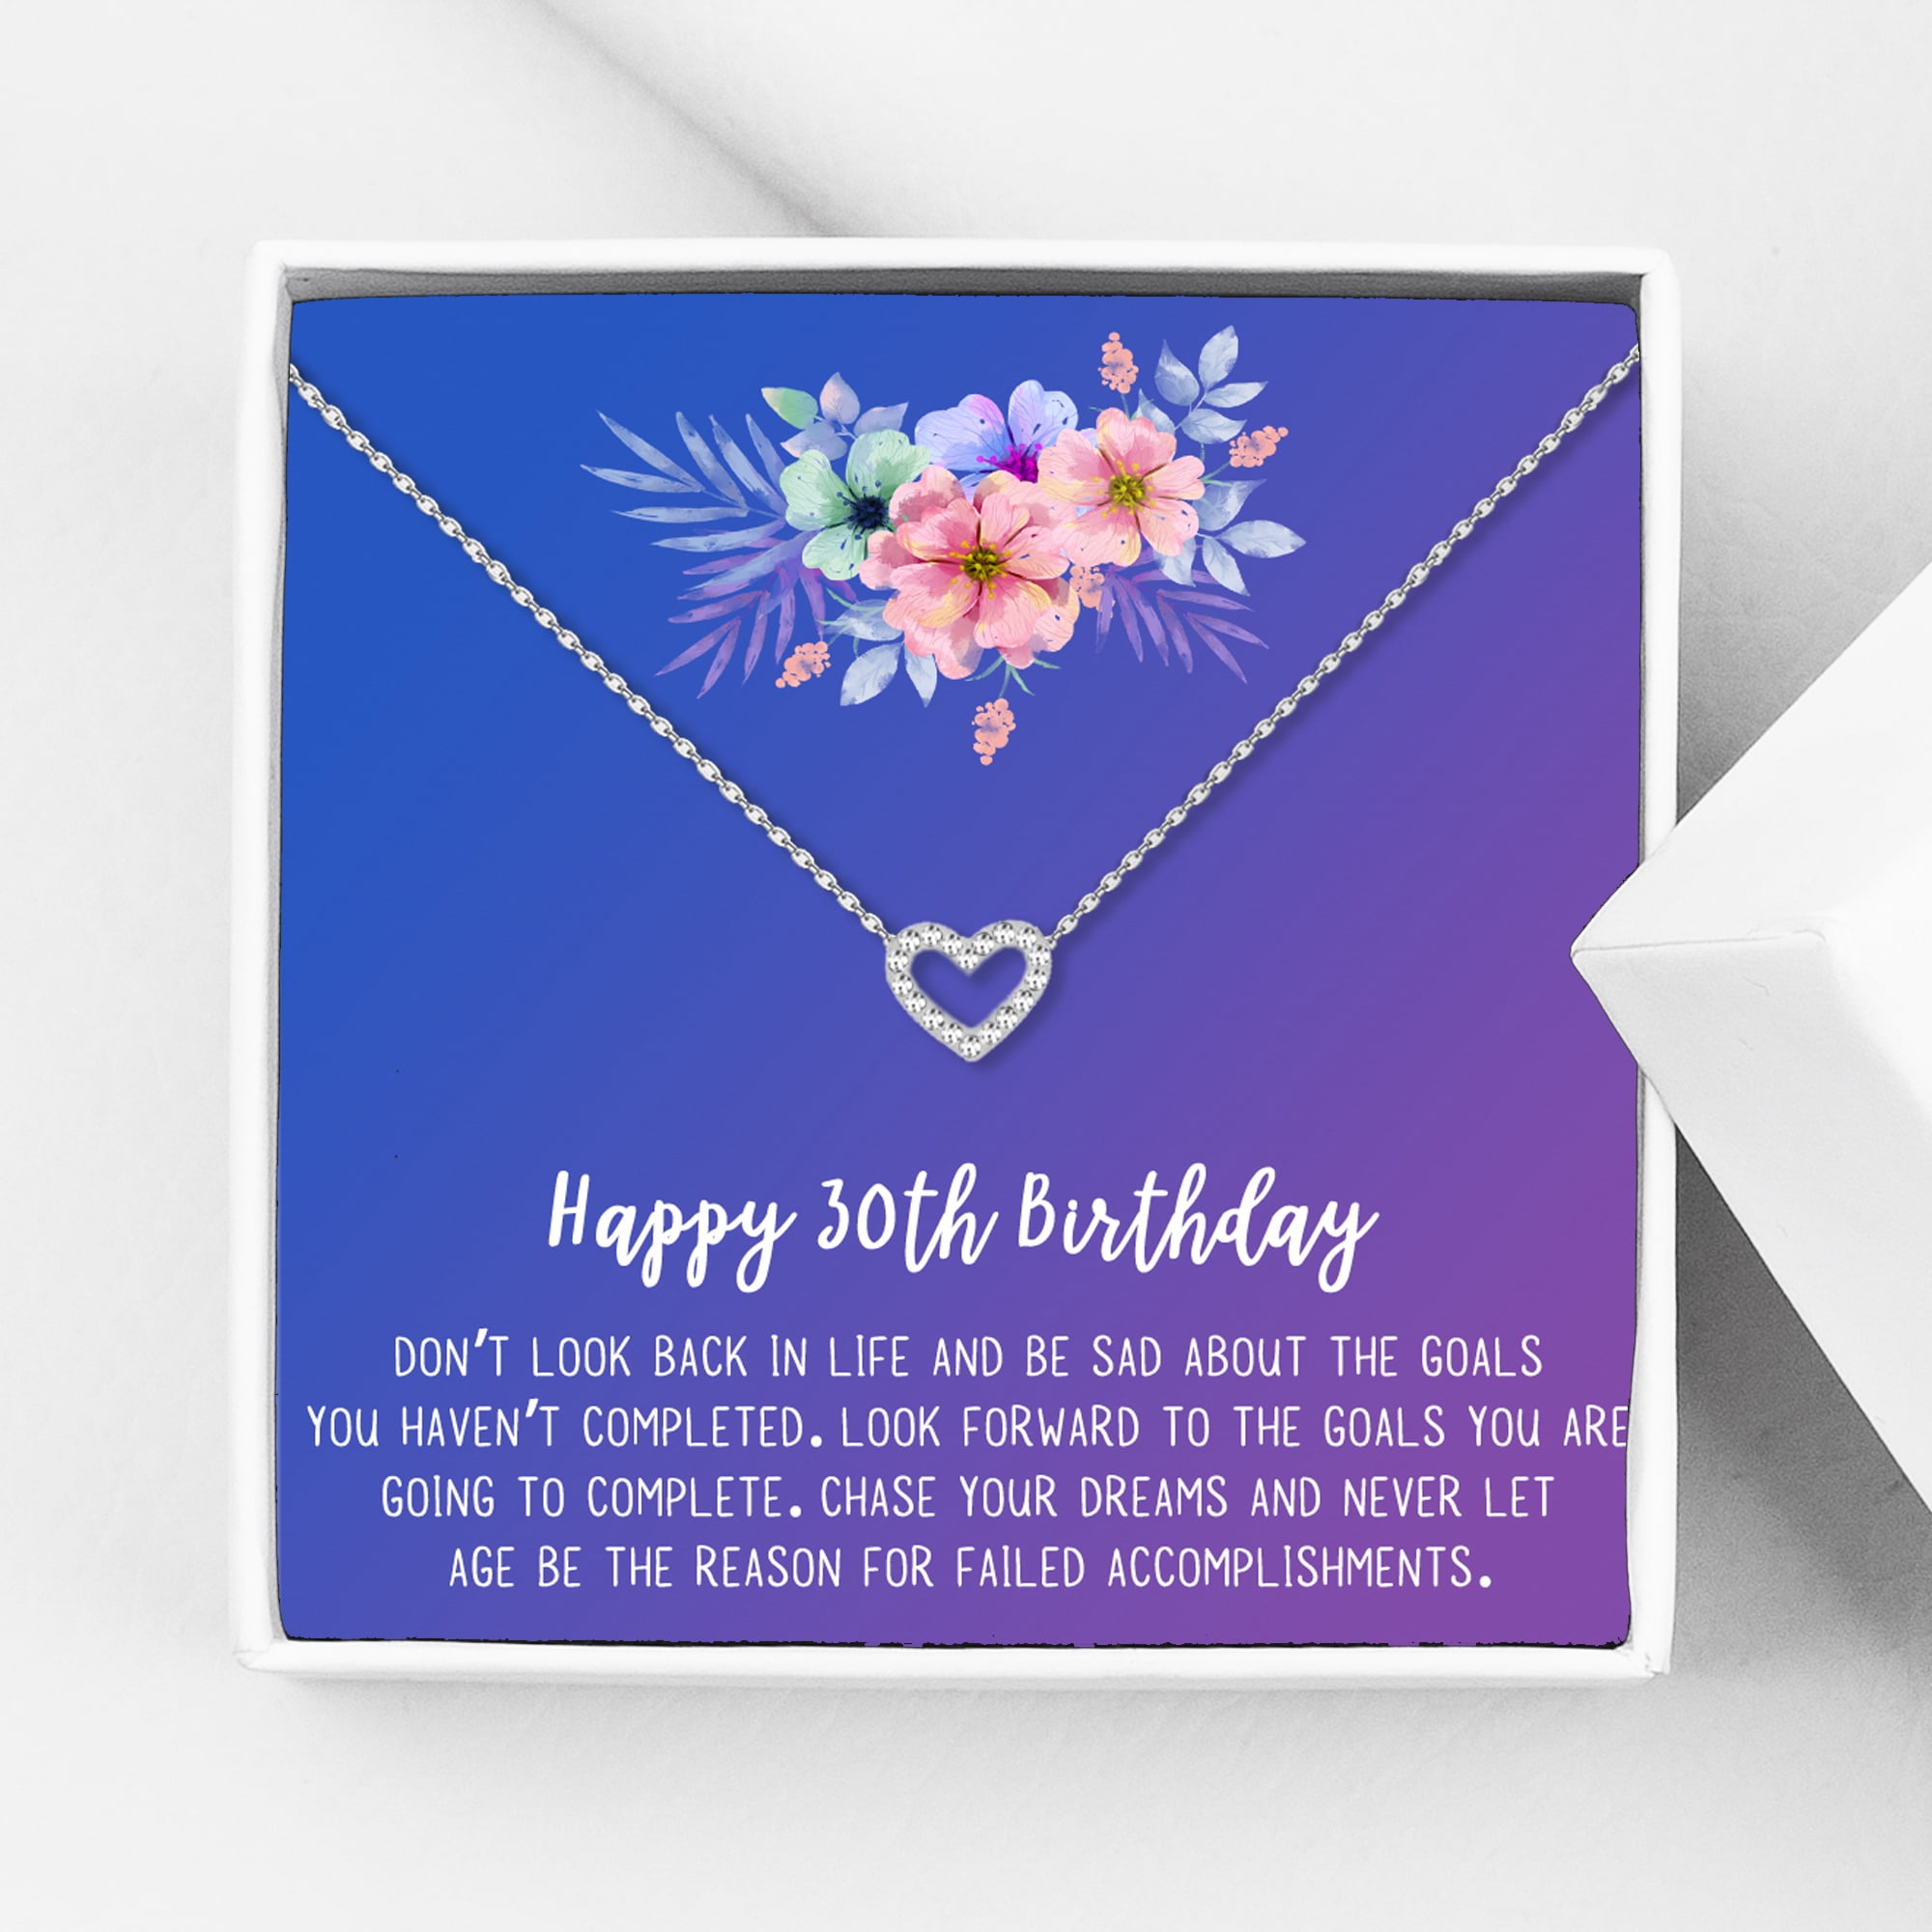 Details about   24 Birthday Party Invitations Pink Hearts Cards w/ Envelopes 